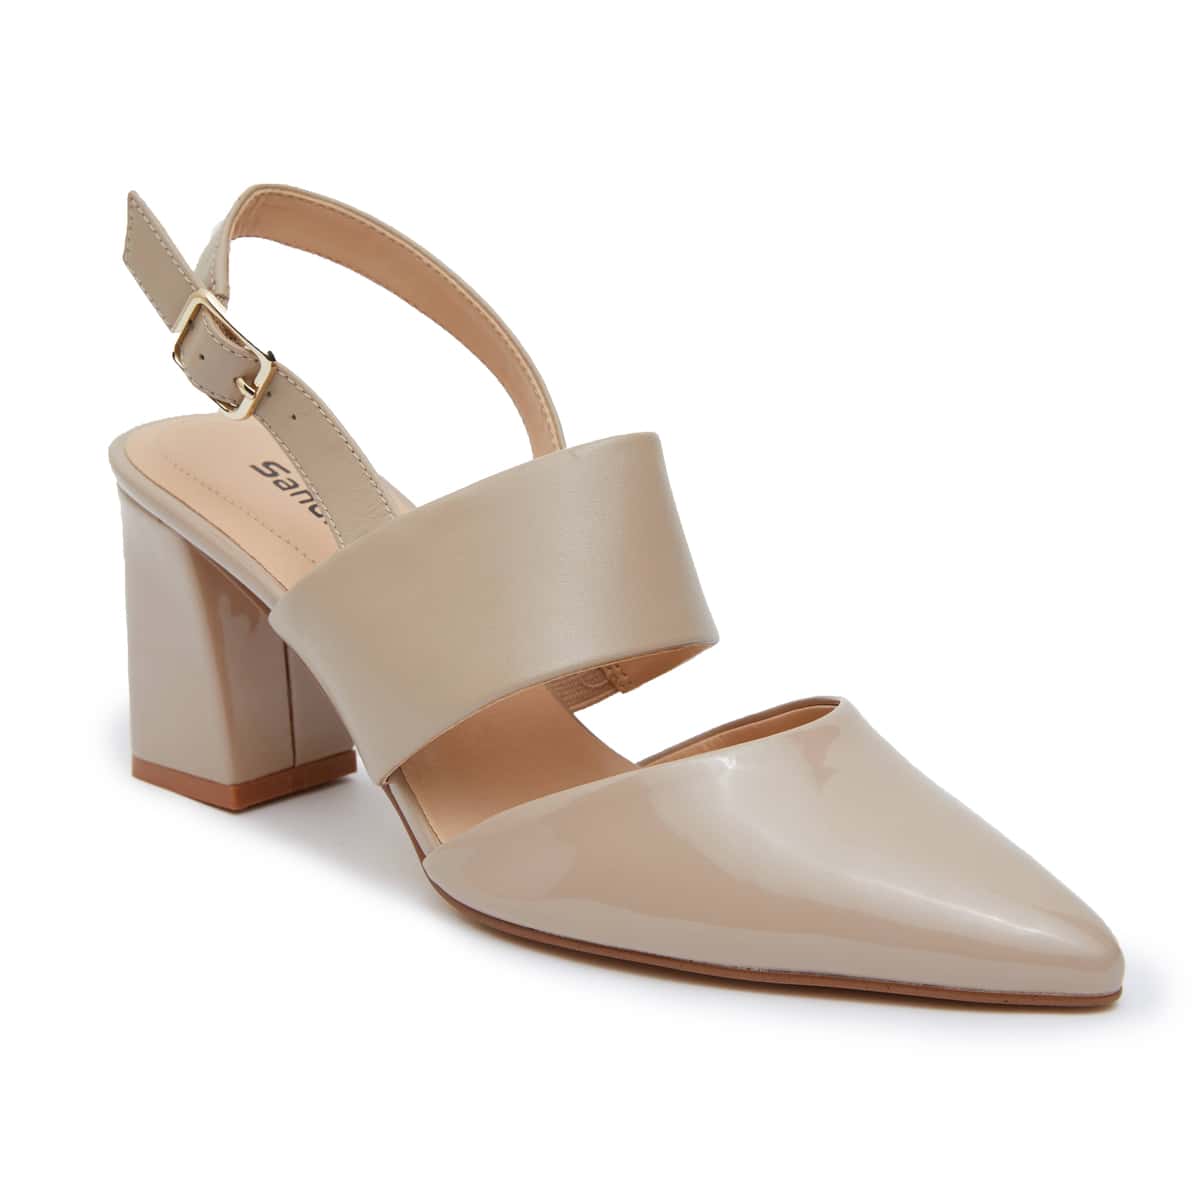 Kitson Heel in Nude Patent